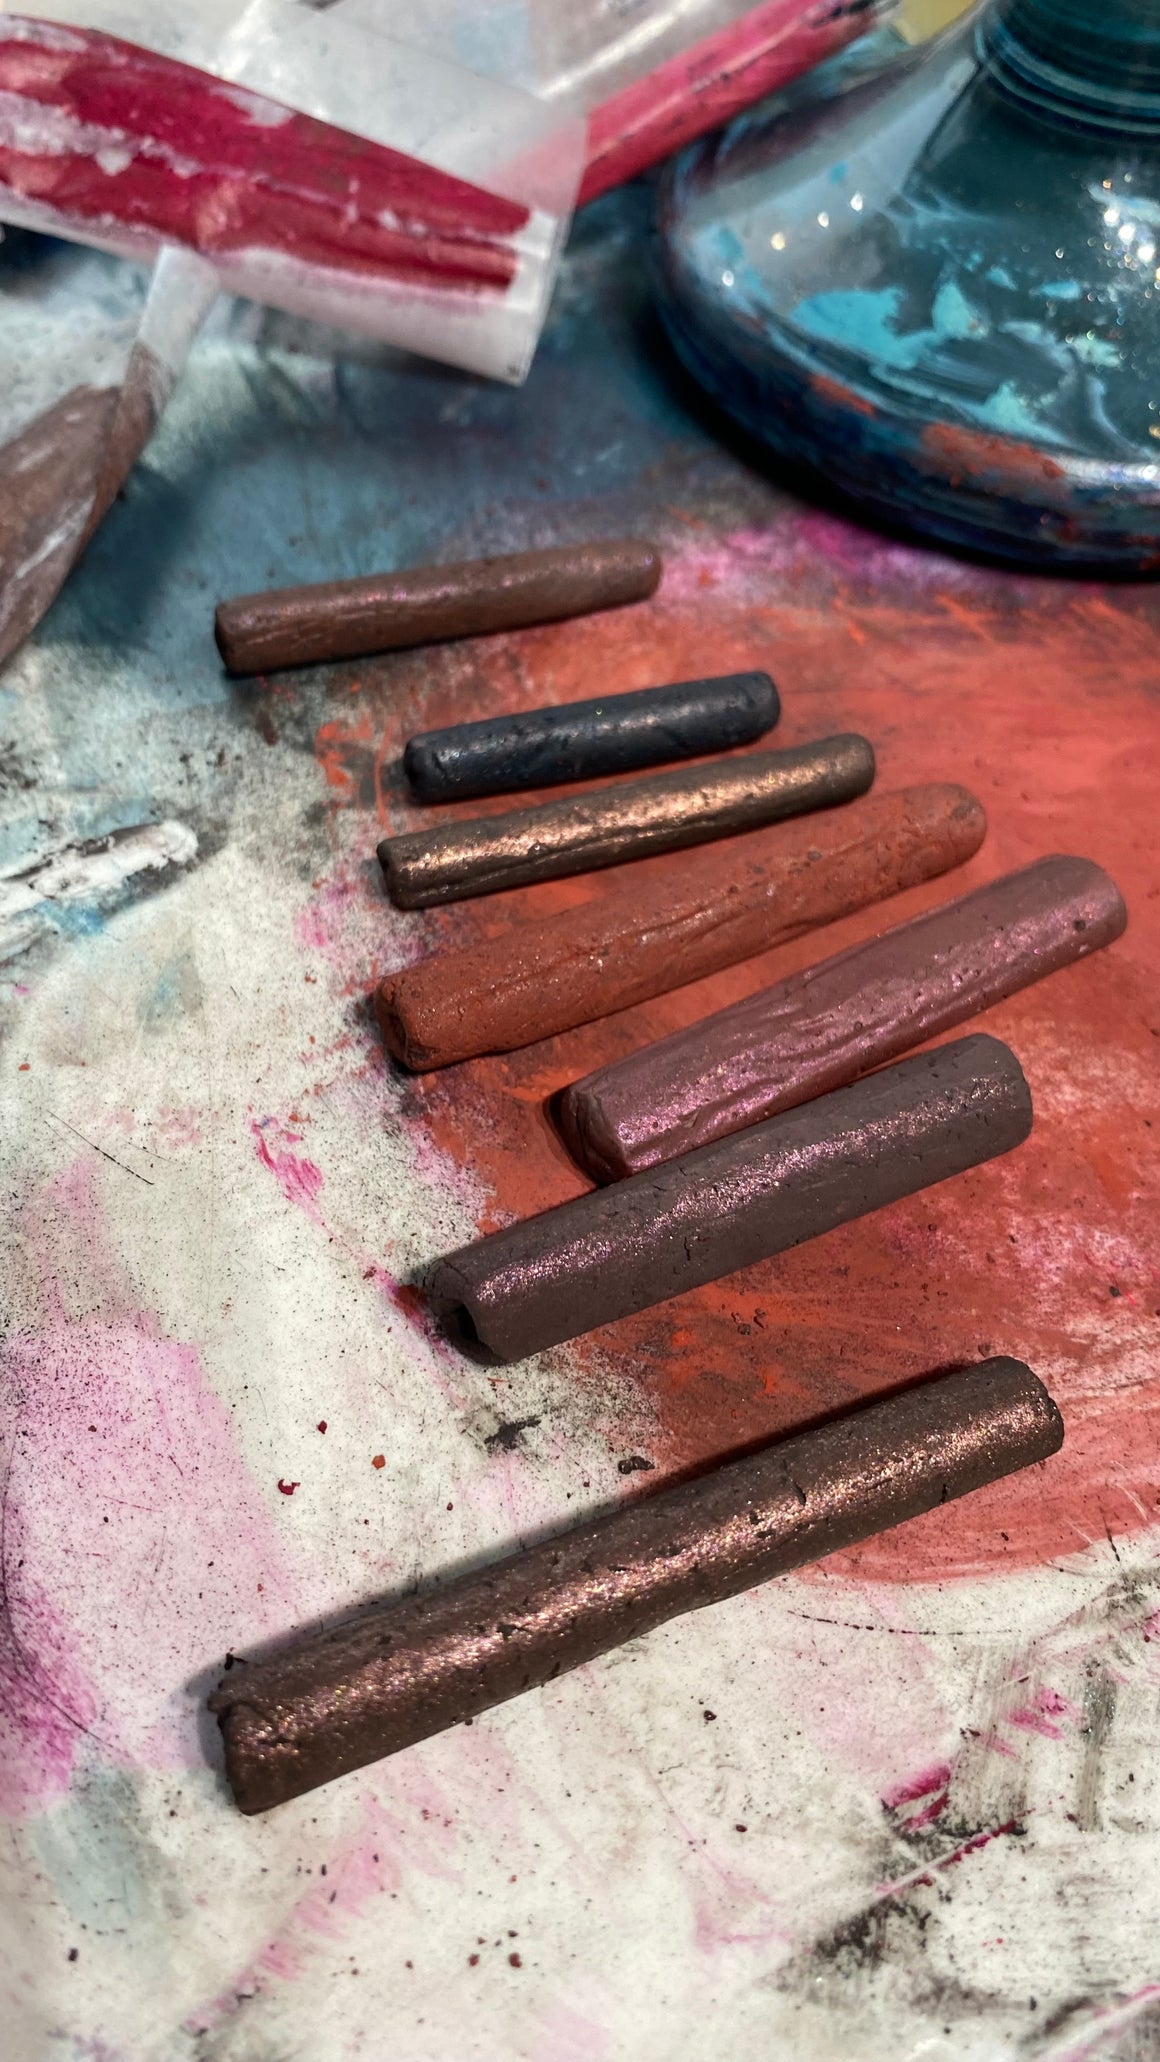 PIGMENT TO PAINT: drawing sticks course